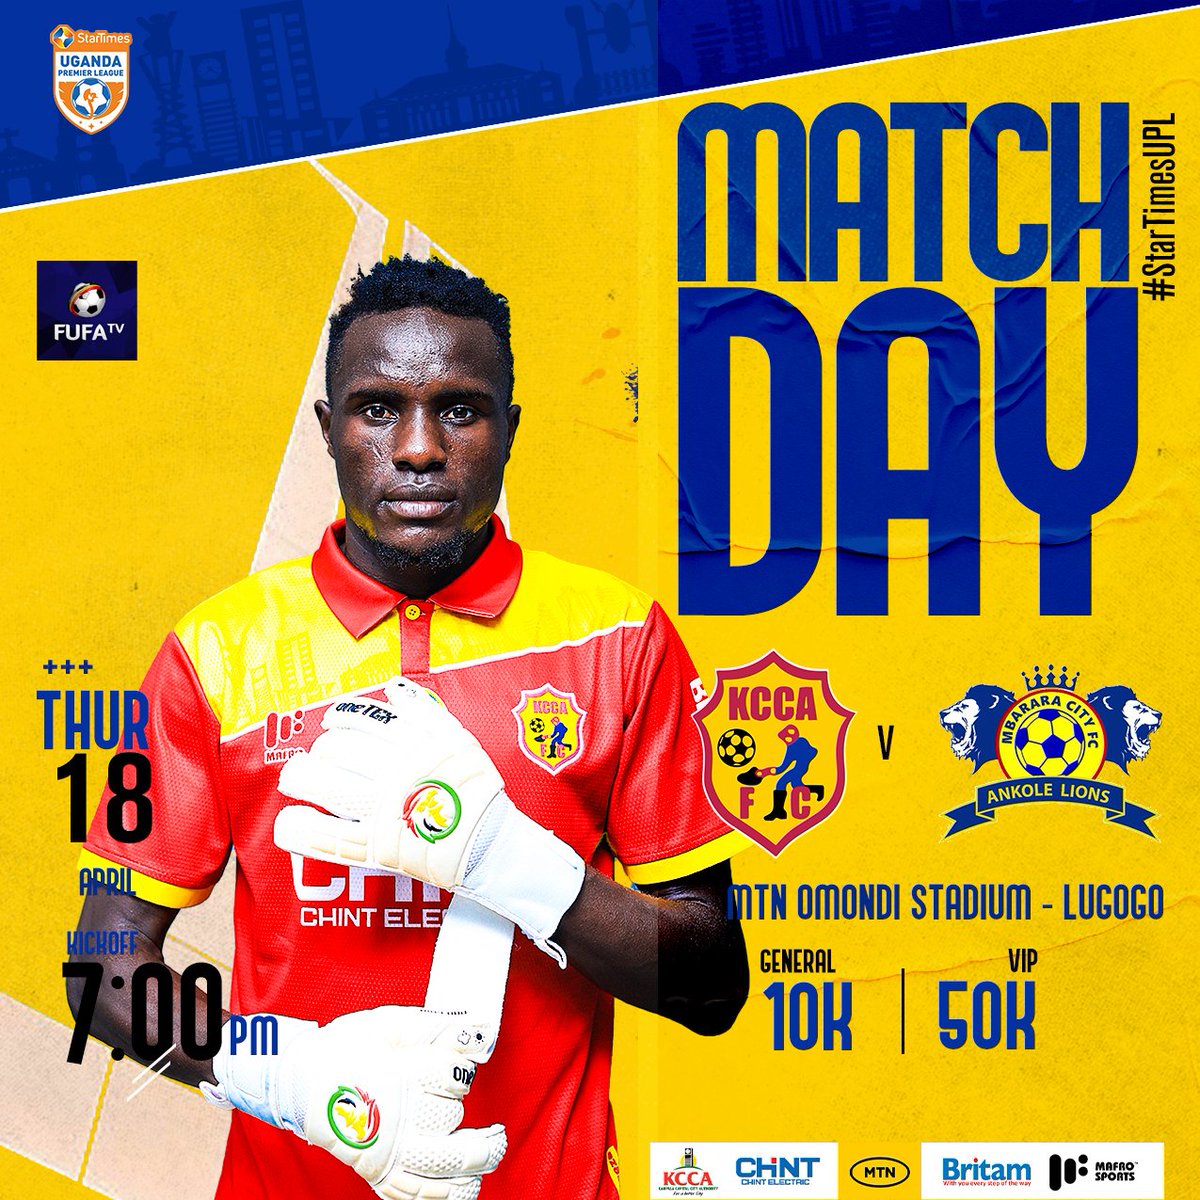 Game day glow! 💛💙⚽️🔥
See you under the lights at 7 PM!

#KCCAFC #KCCAMBA #StarTimesUPL #KCCAFC60